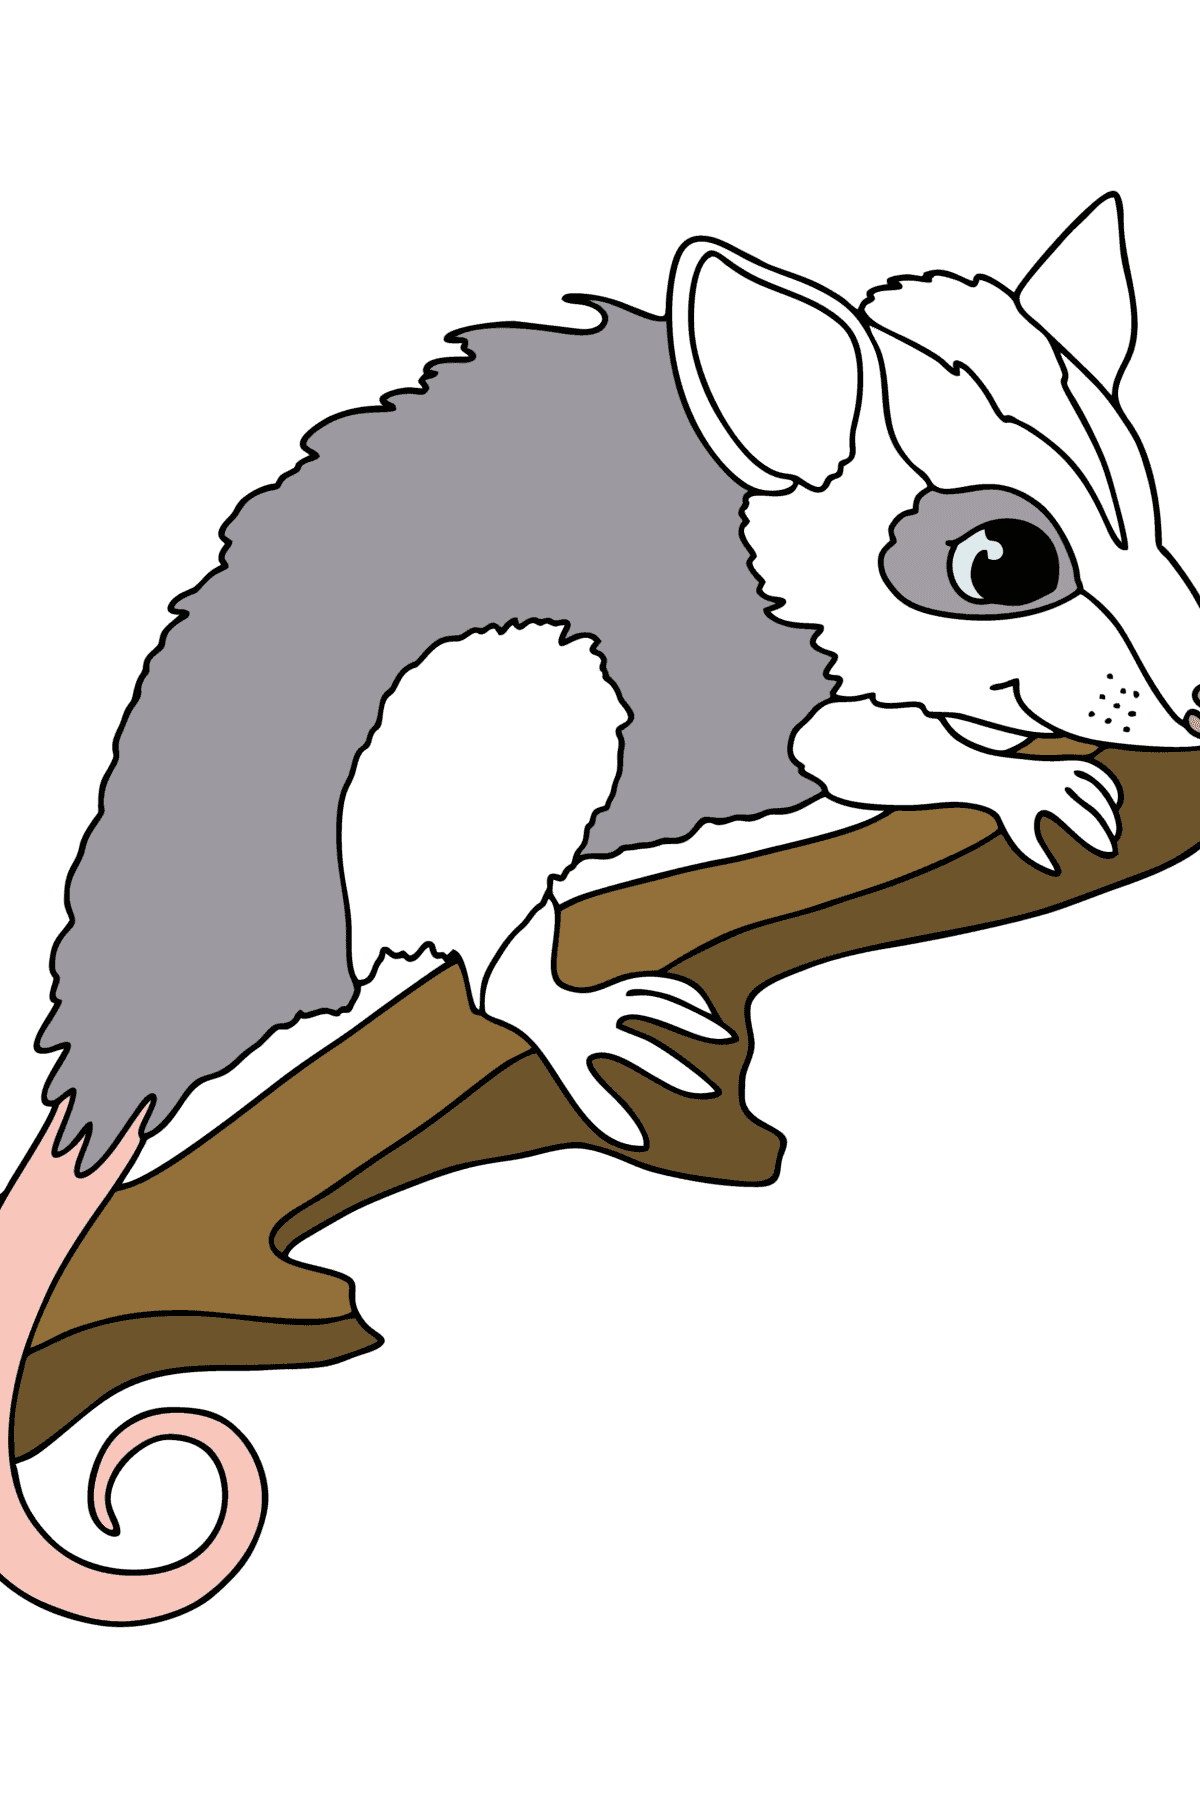 Opossum сoloring page - Coloring Pages for Kids